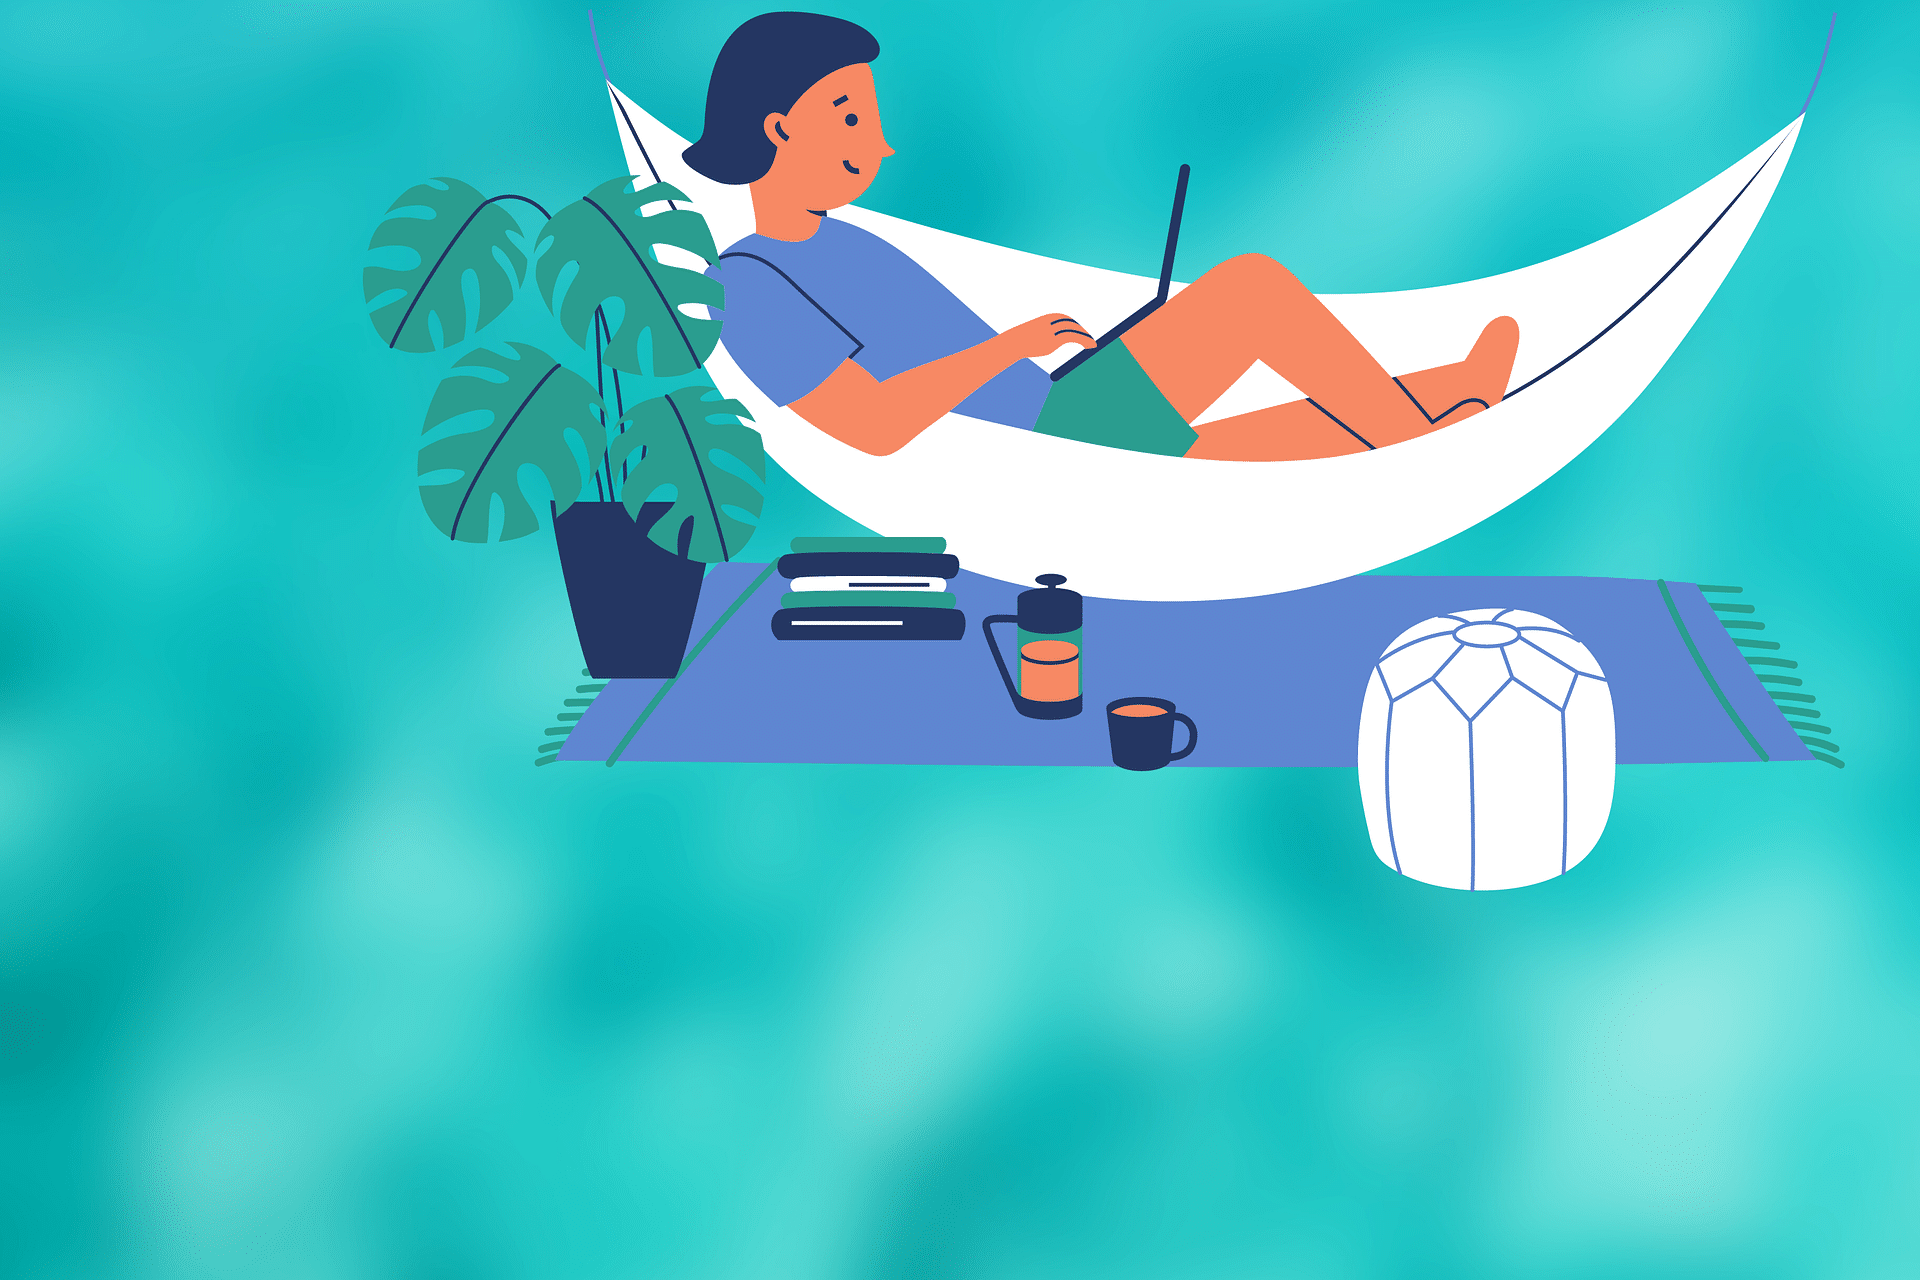 An illustration of a woman working on a hammock. Meant to symbolize working from home.